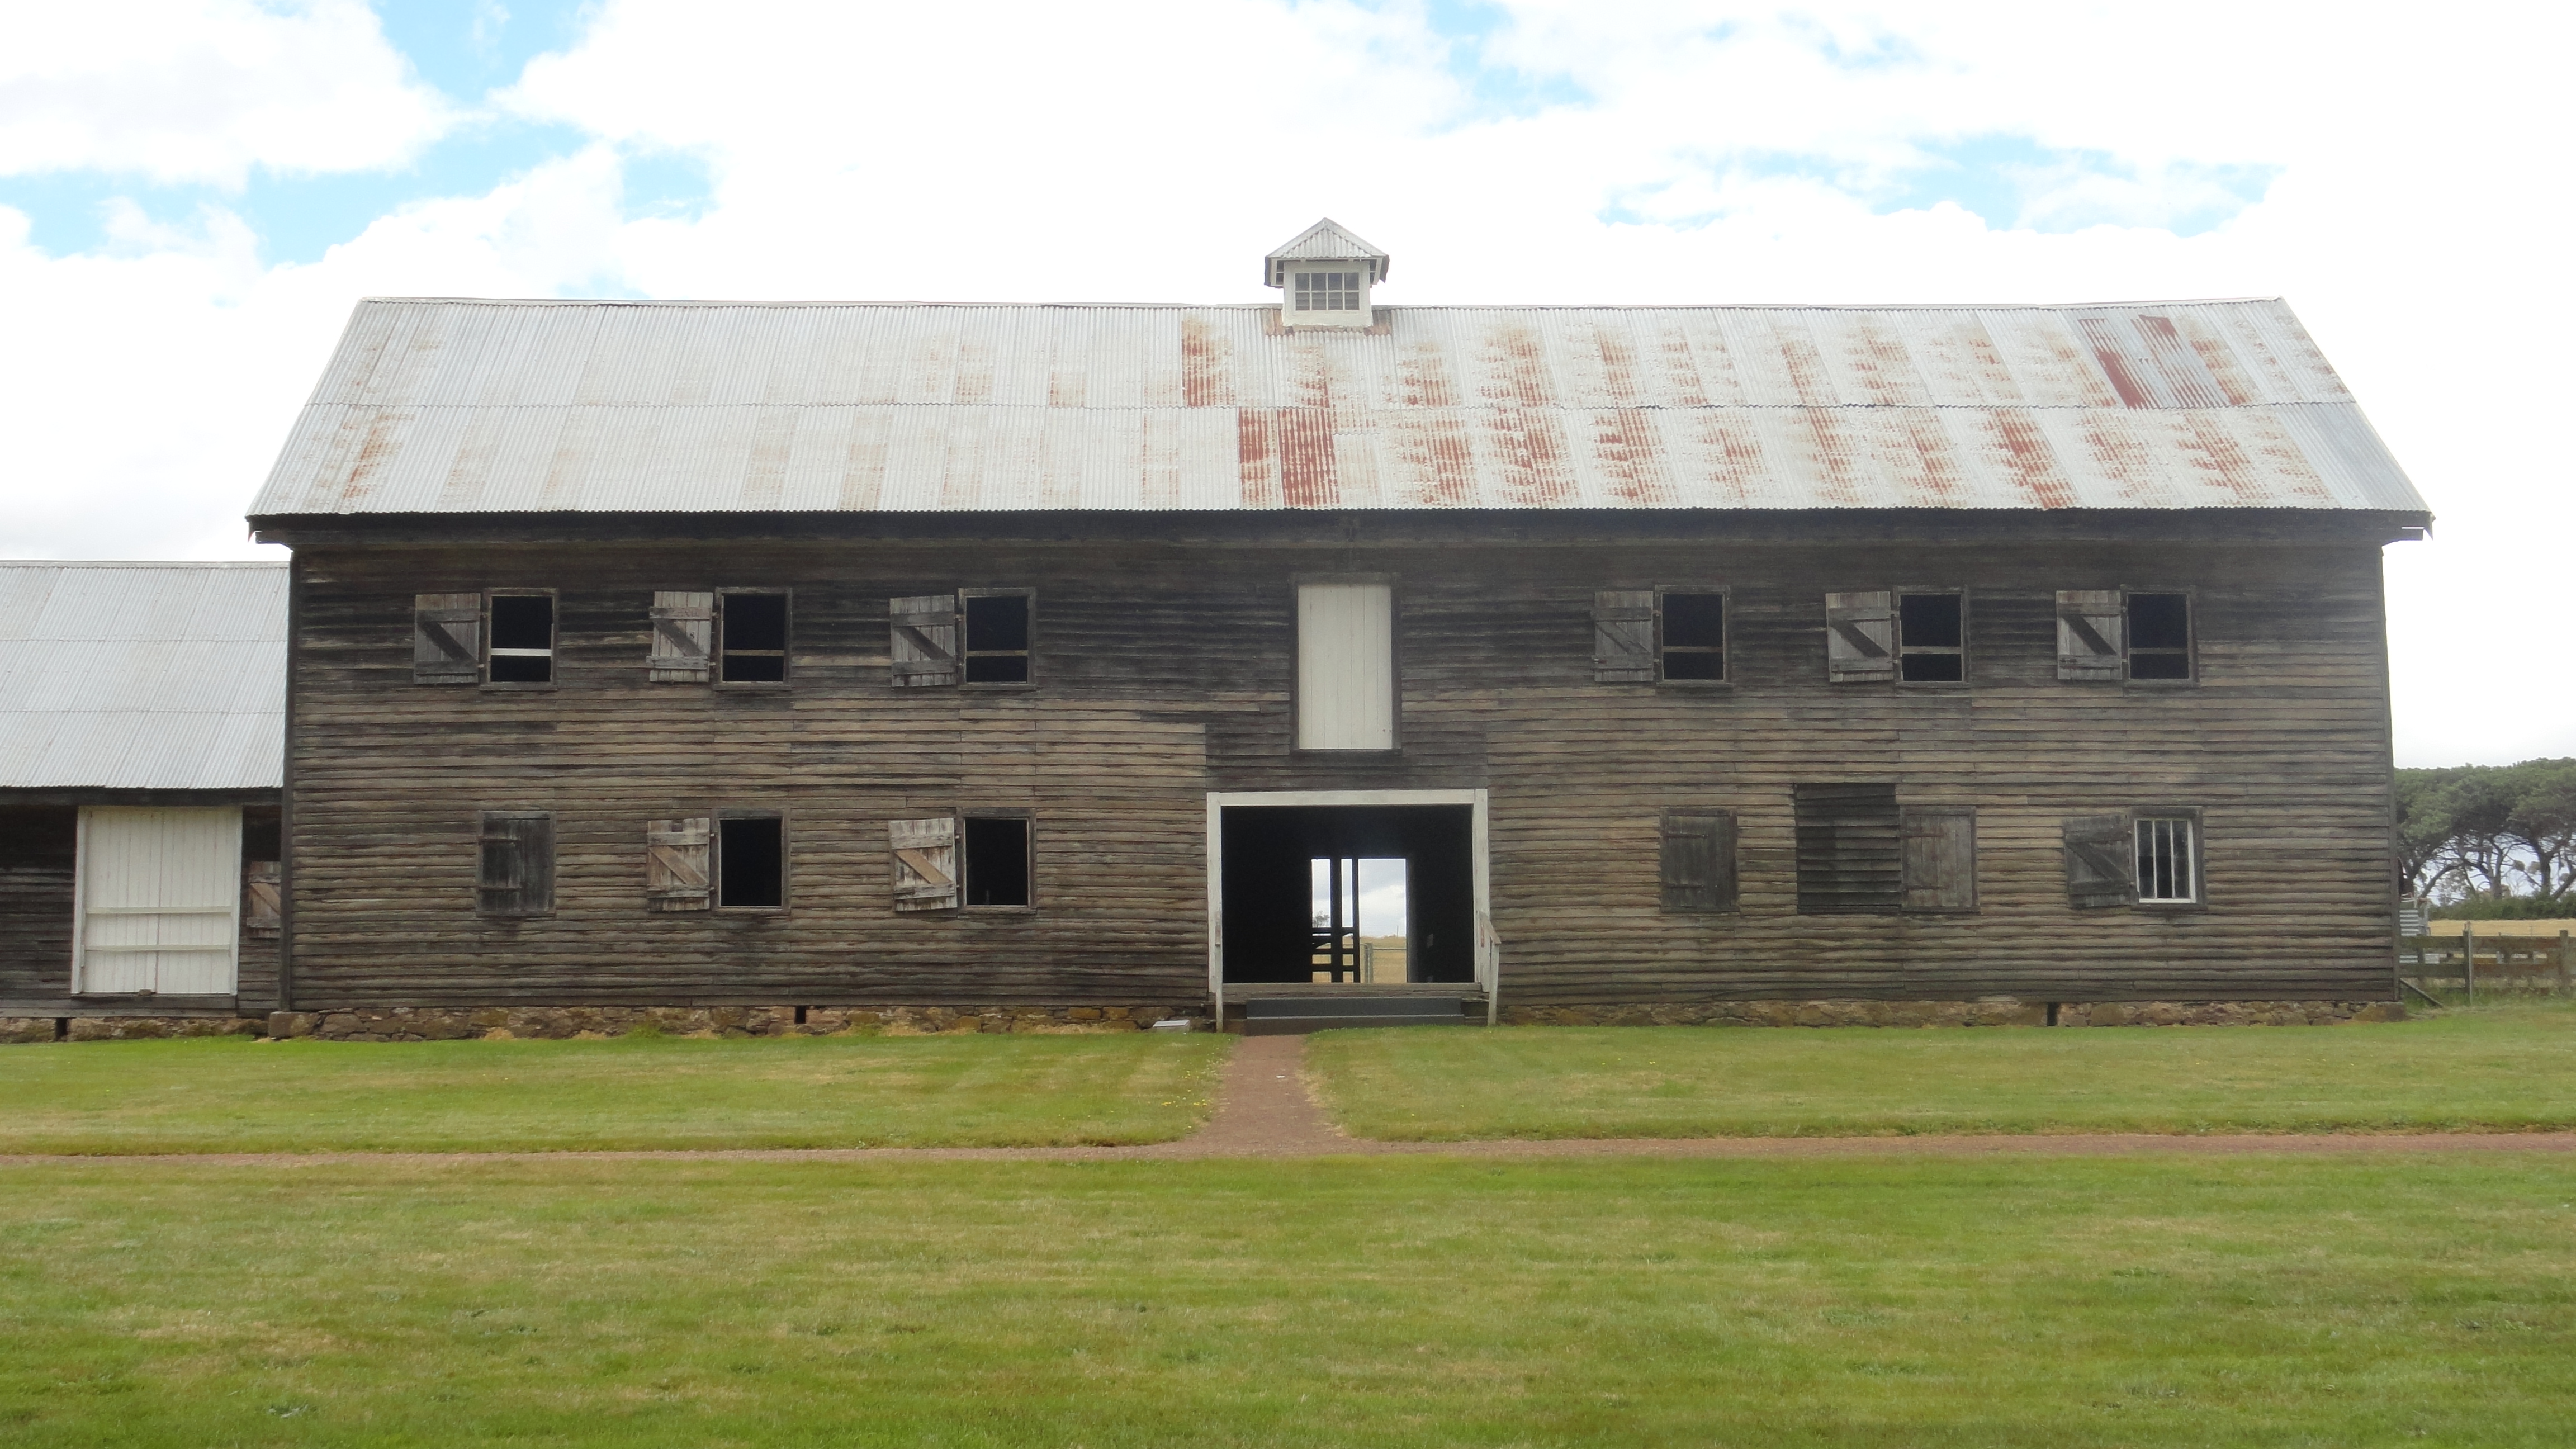 The woolshed is the oldest operating woolshed in Australia.